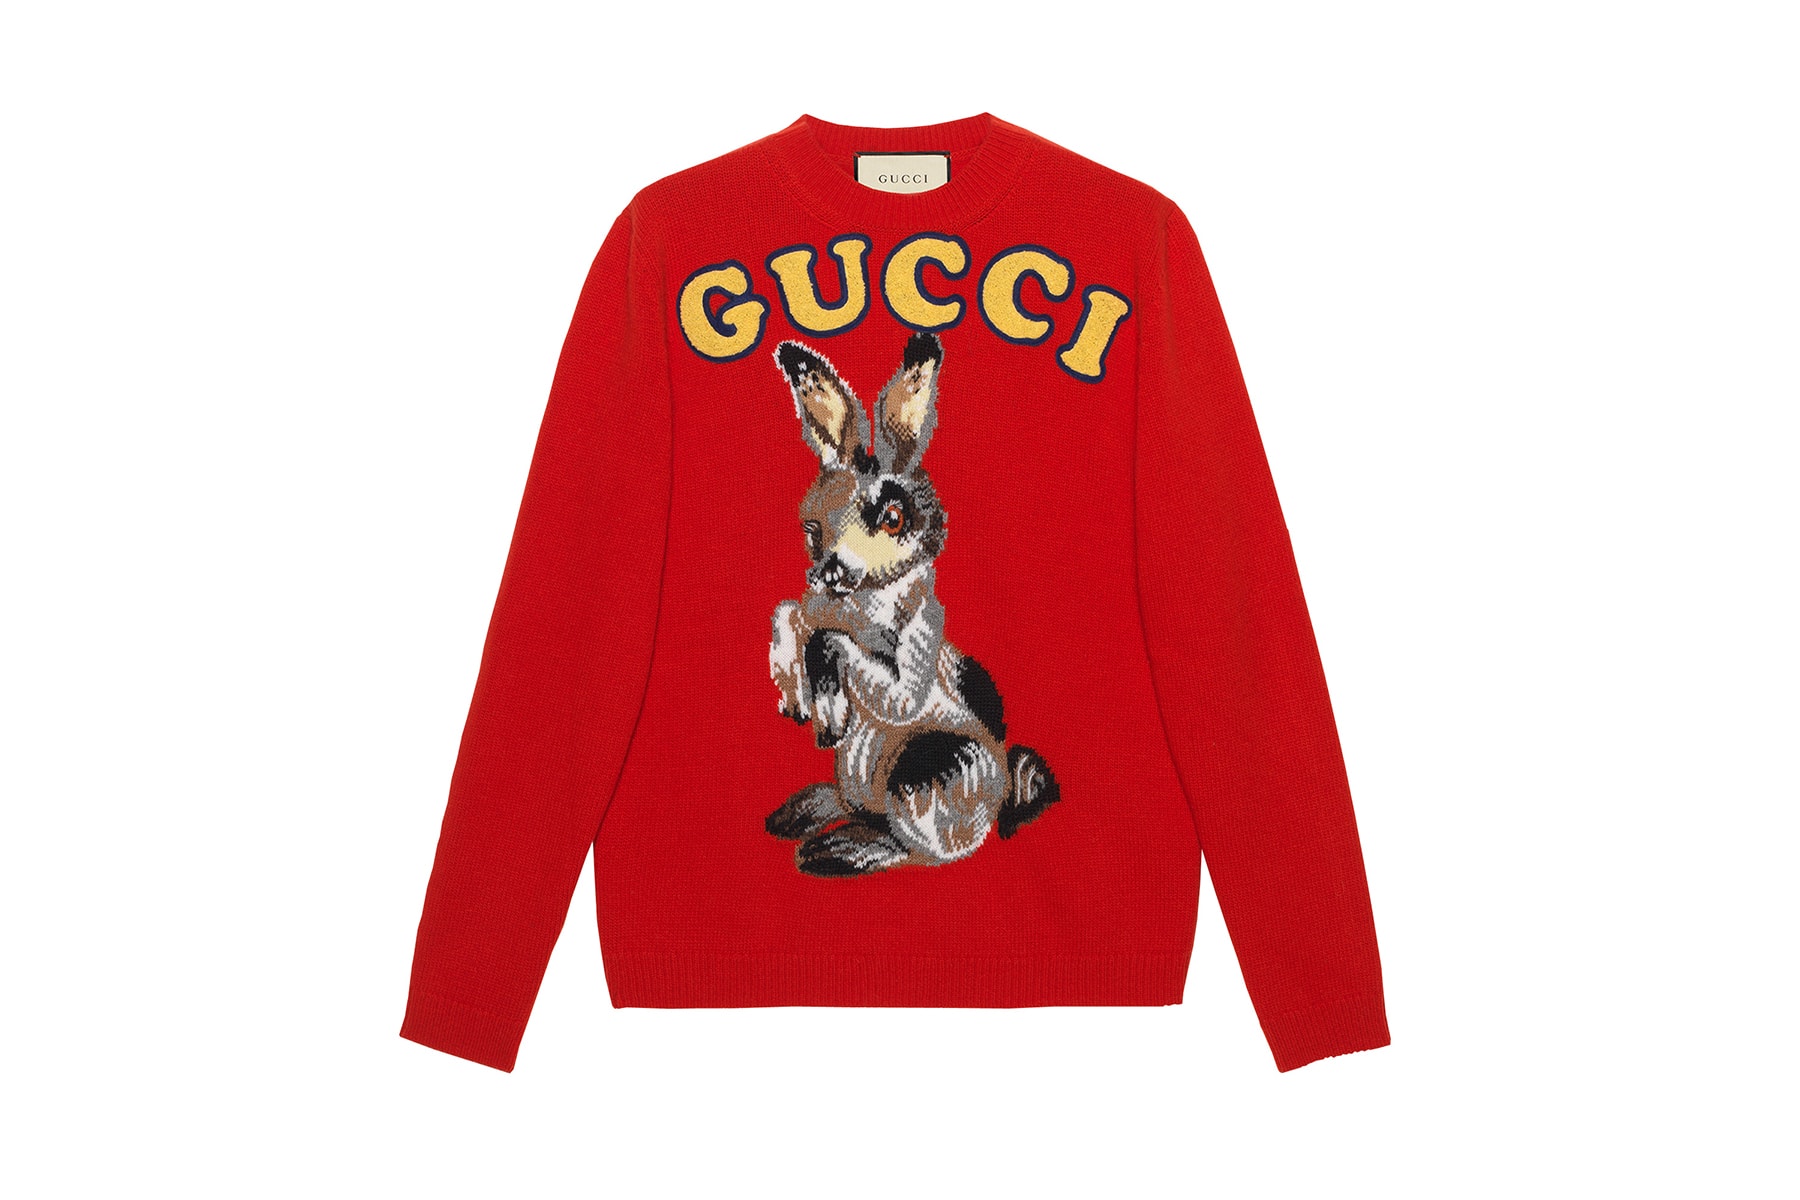 gucci alessandro michele special pre-fall 2018 collection exclusive dover street market dsm new york london tokyo singapore beijing